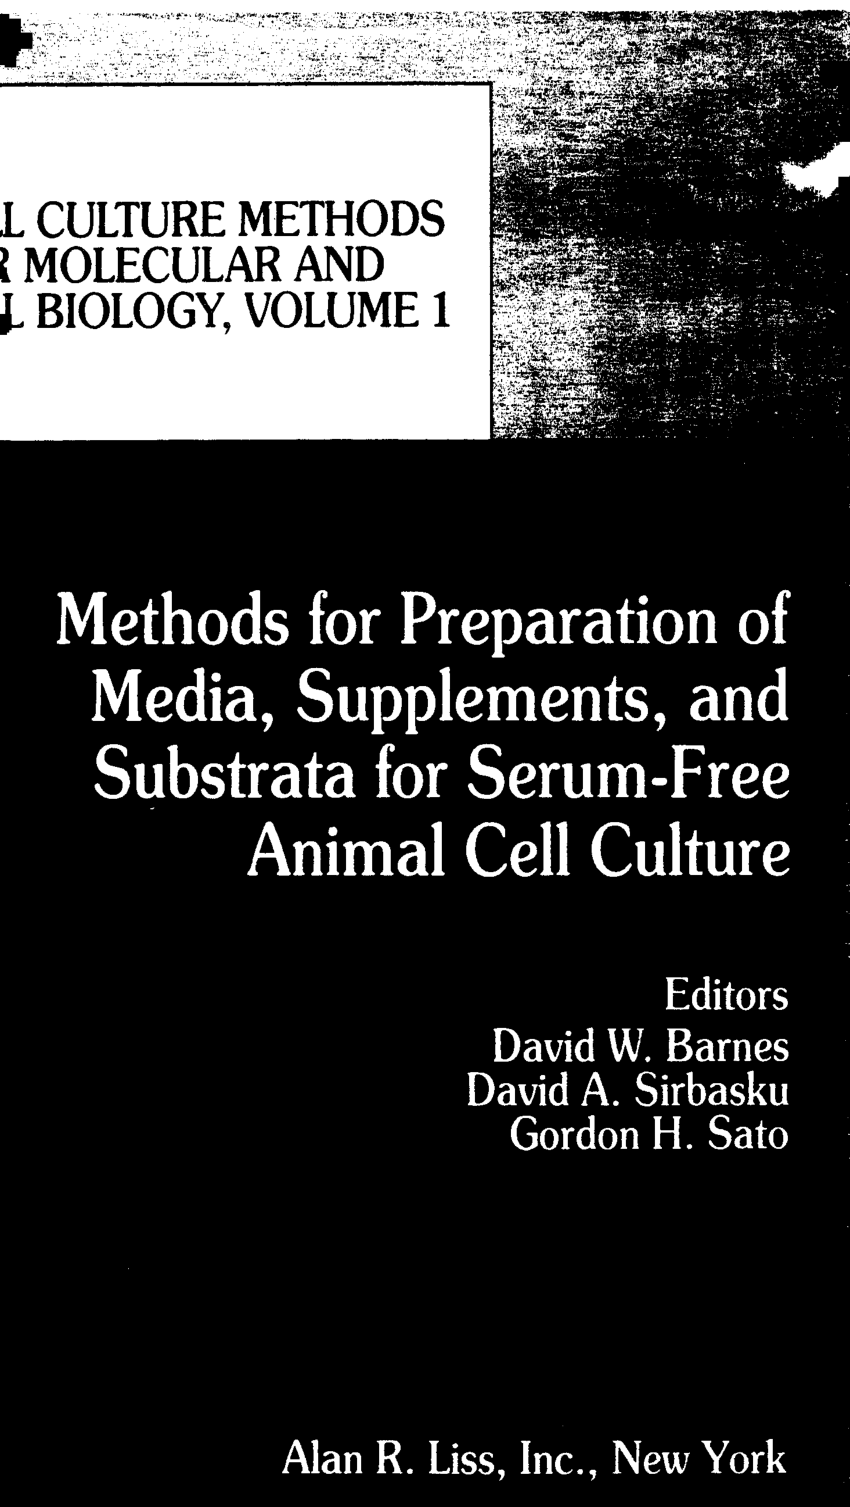 PDF) Cell Culture Methods for Molecular and Cell Biology - Volume 1:  Methods for Preparation of Media, Supplements, and Substrata for Serum-Free Animal  Cell Culture, Editors, David W Barnes, David A Sirbasku